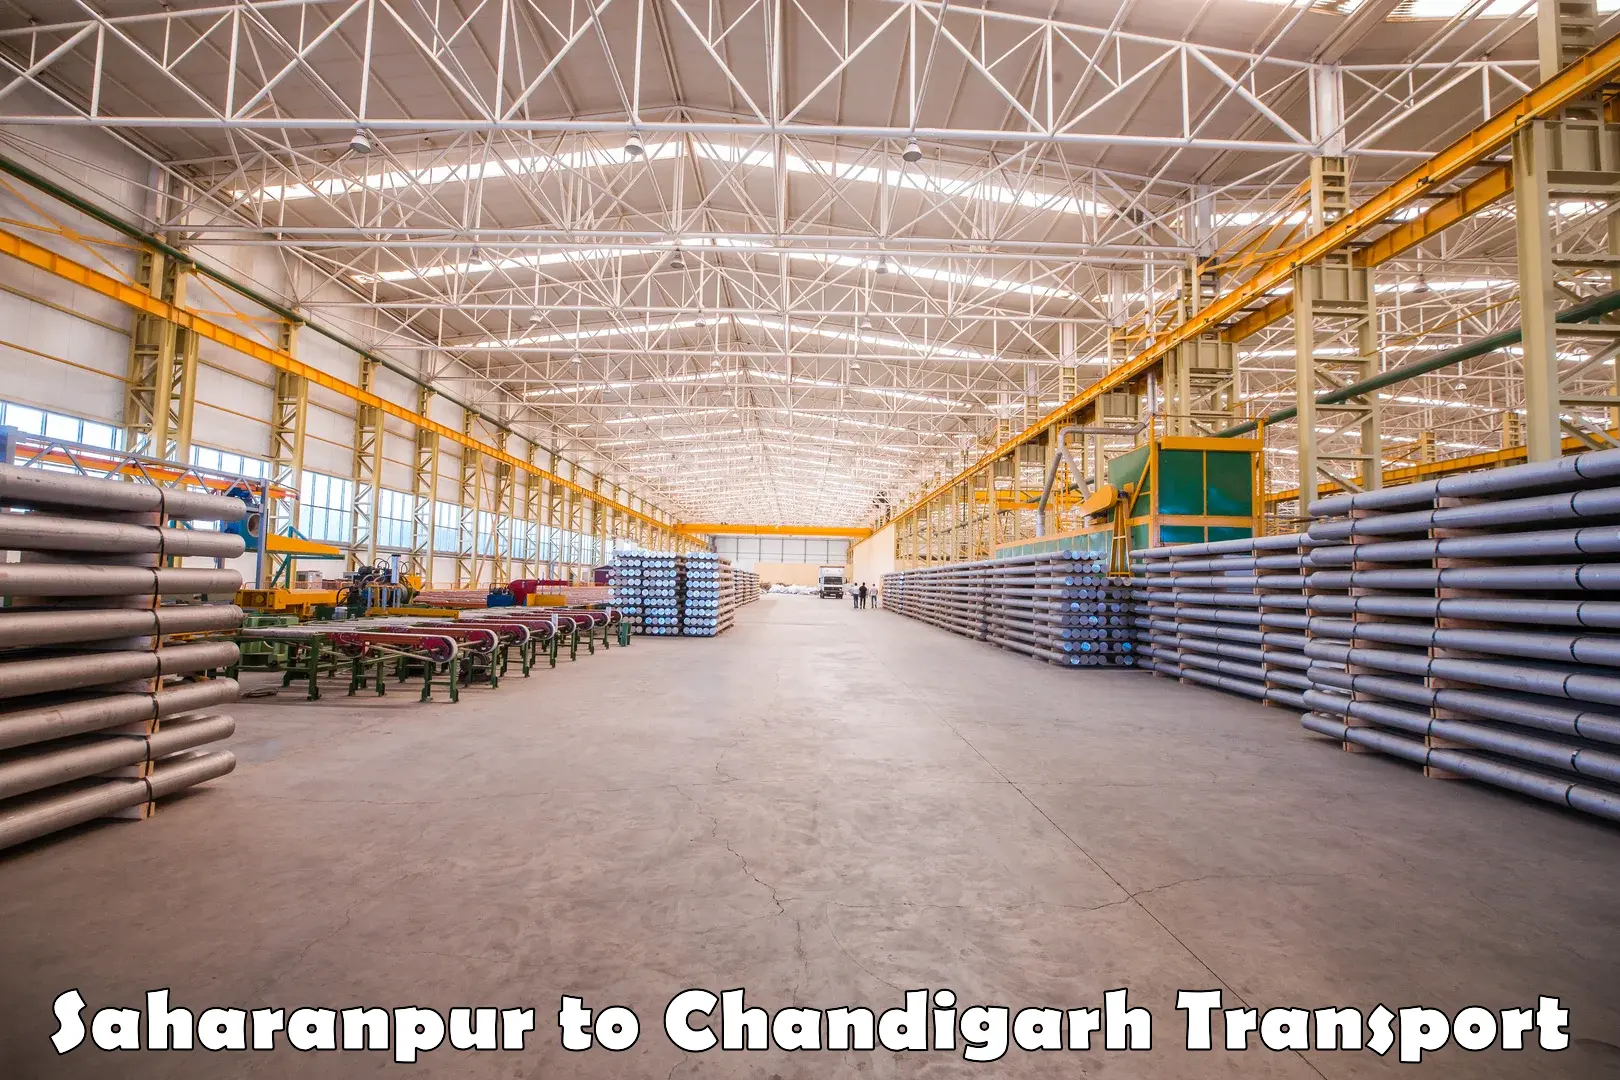 Truck transport companies in India Saharanpur to Chandigarh